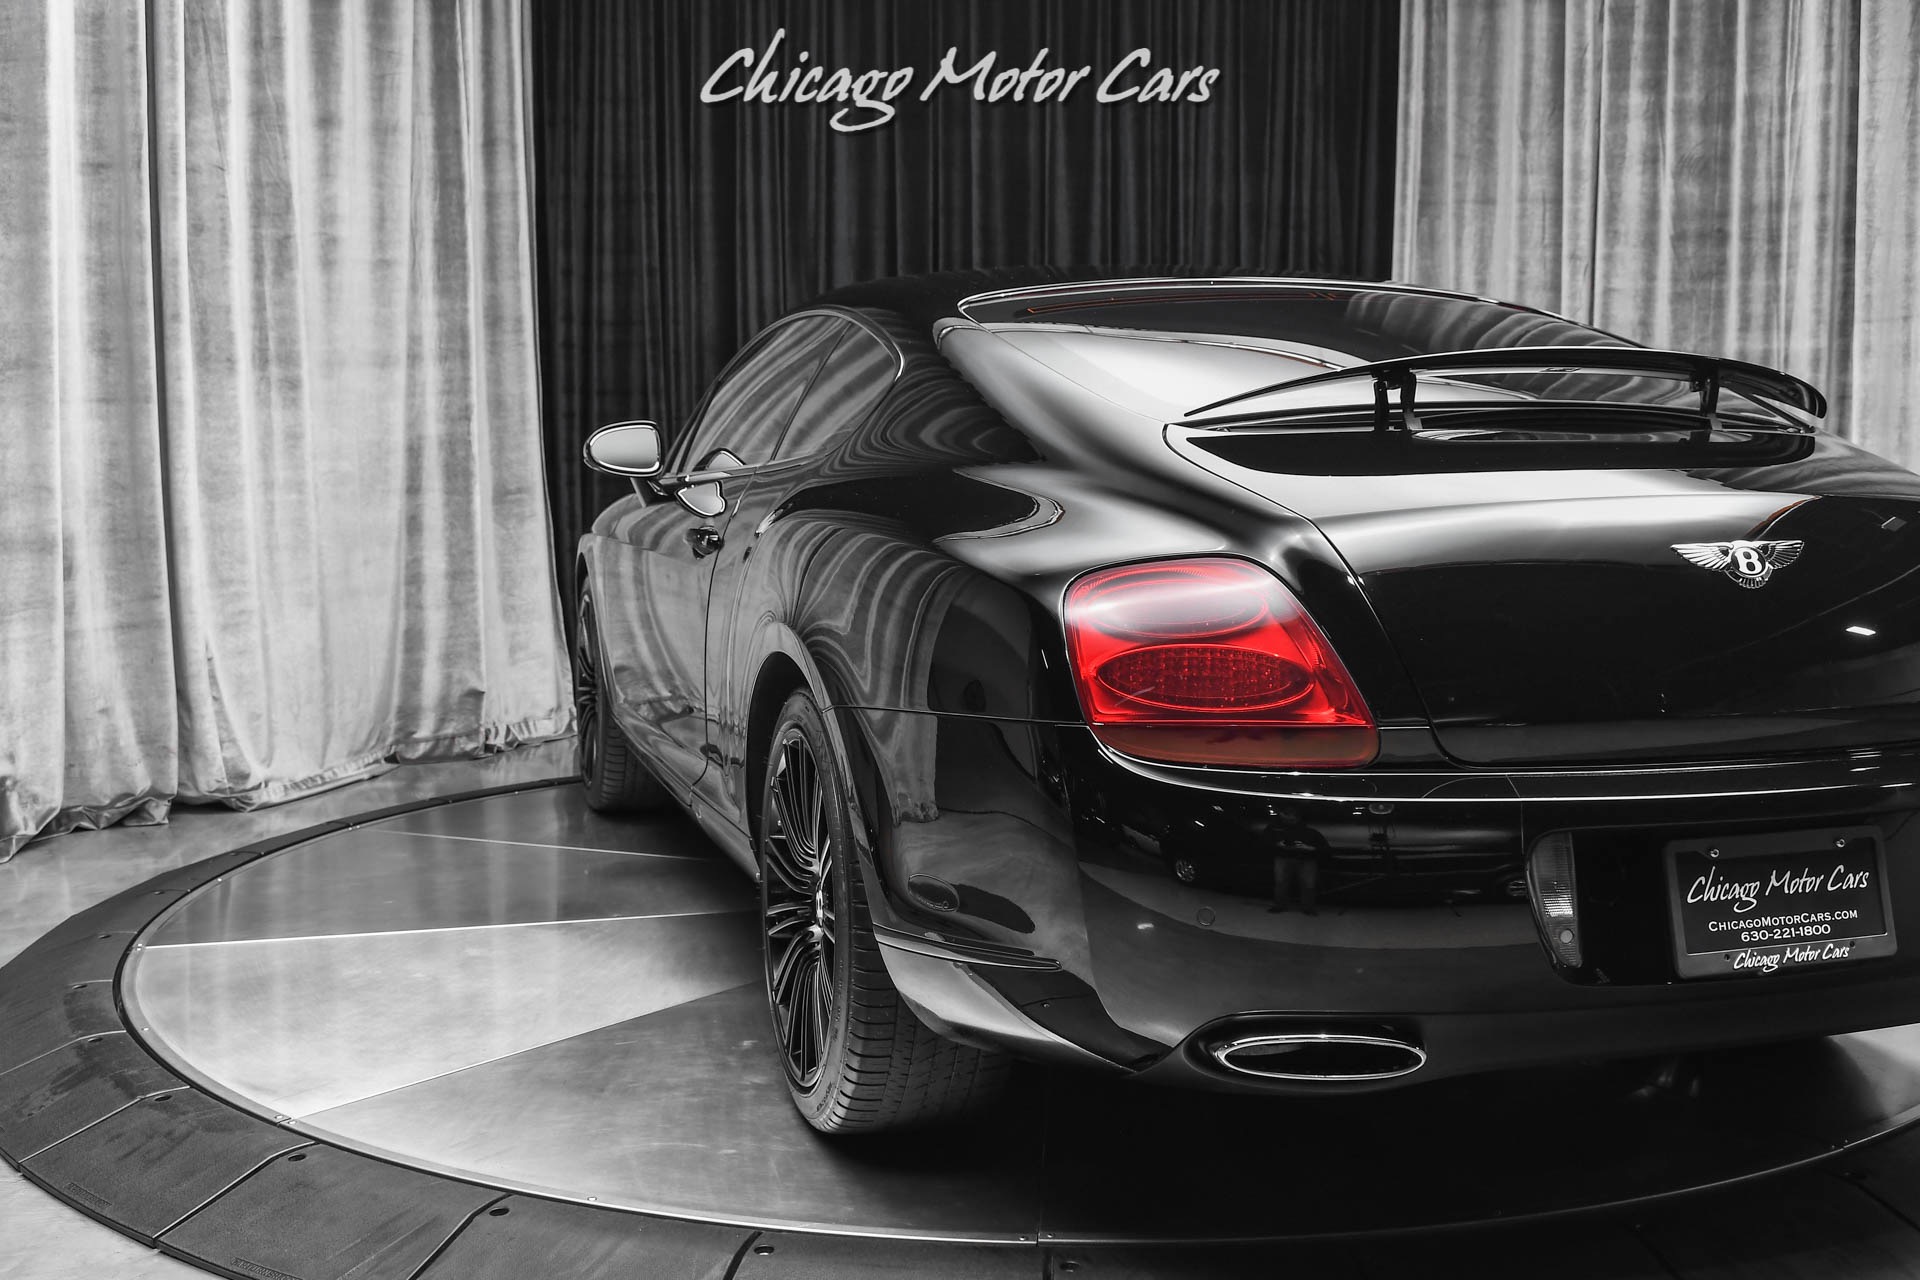 Used-2008-Bentley-Continental-GT-Speed-Coupe-Ceramic-Coated-Front-Massage-Seats-Excellent-Condition